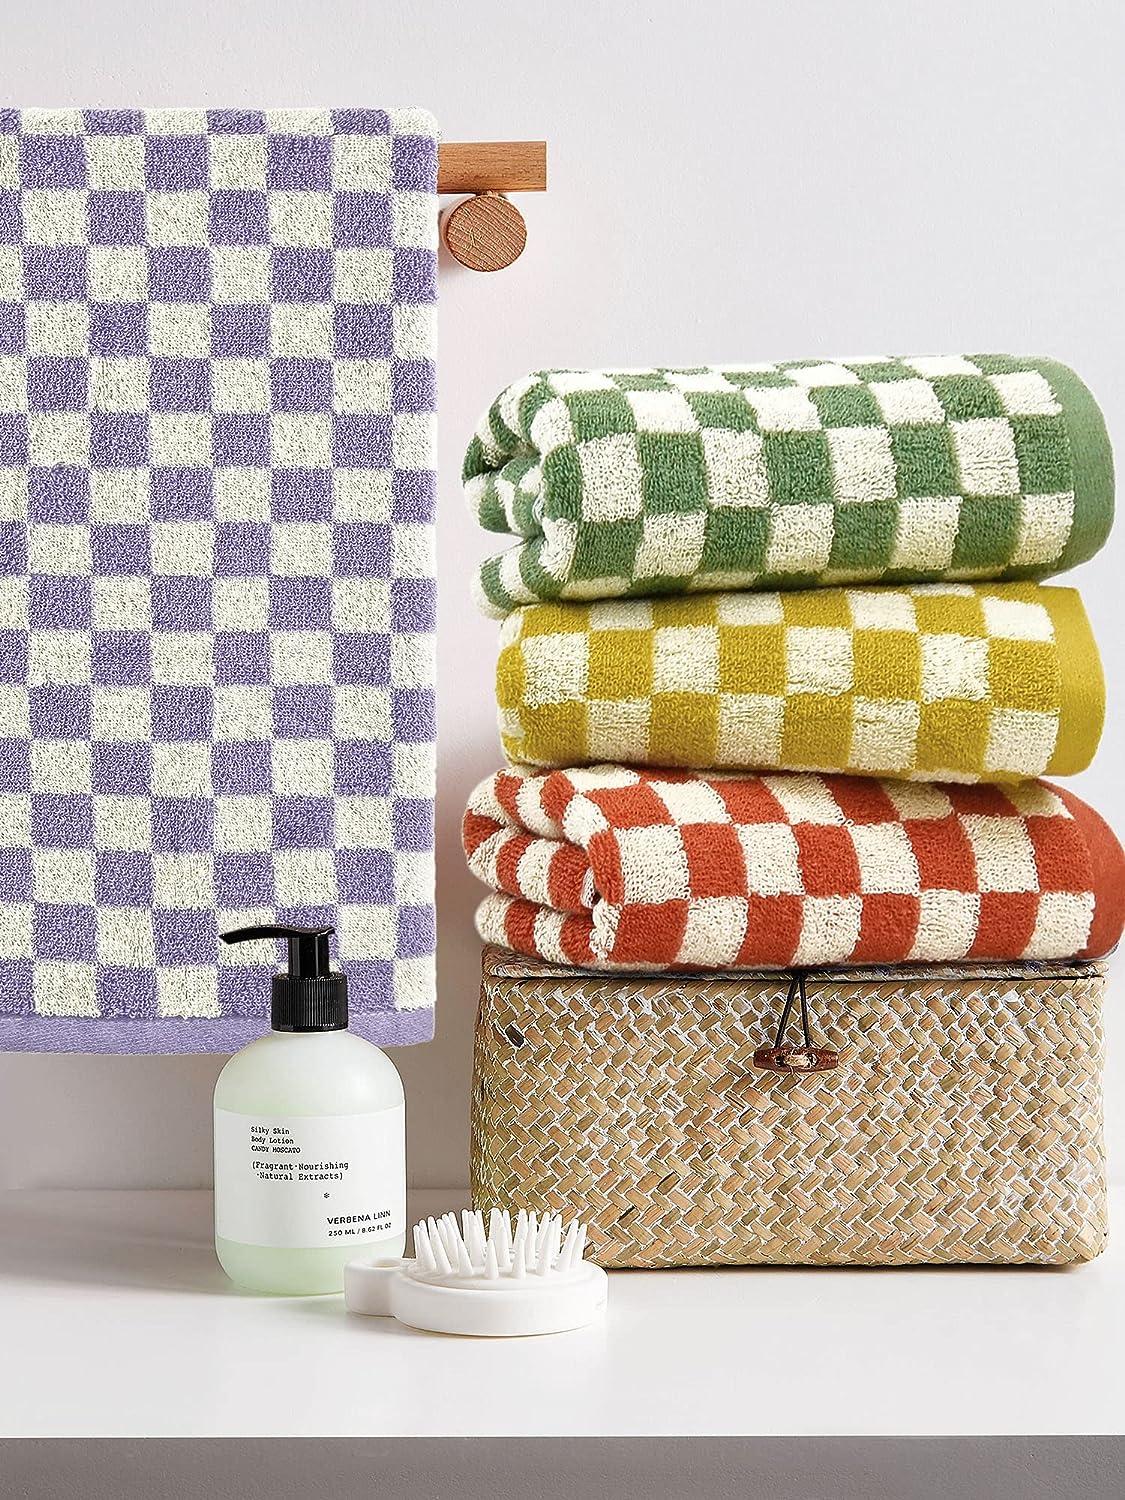 Jacquotha Green Hand Towels for Bathroom Set of 4 - Cute Checkered Hand  Towel